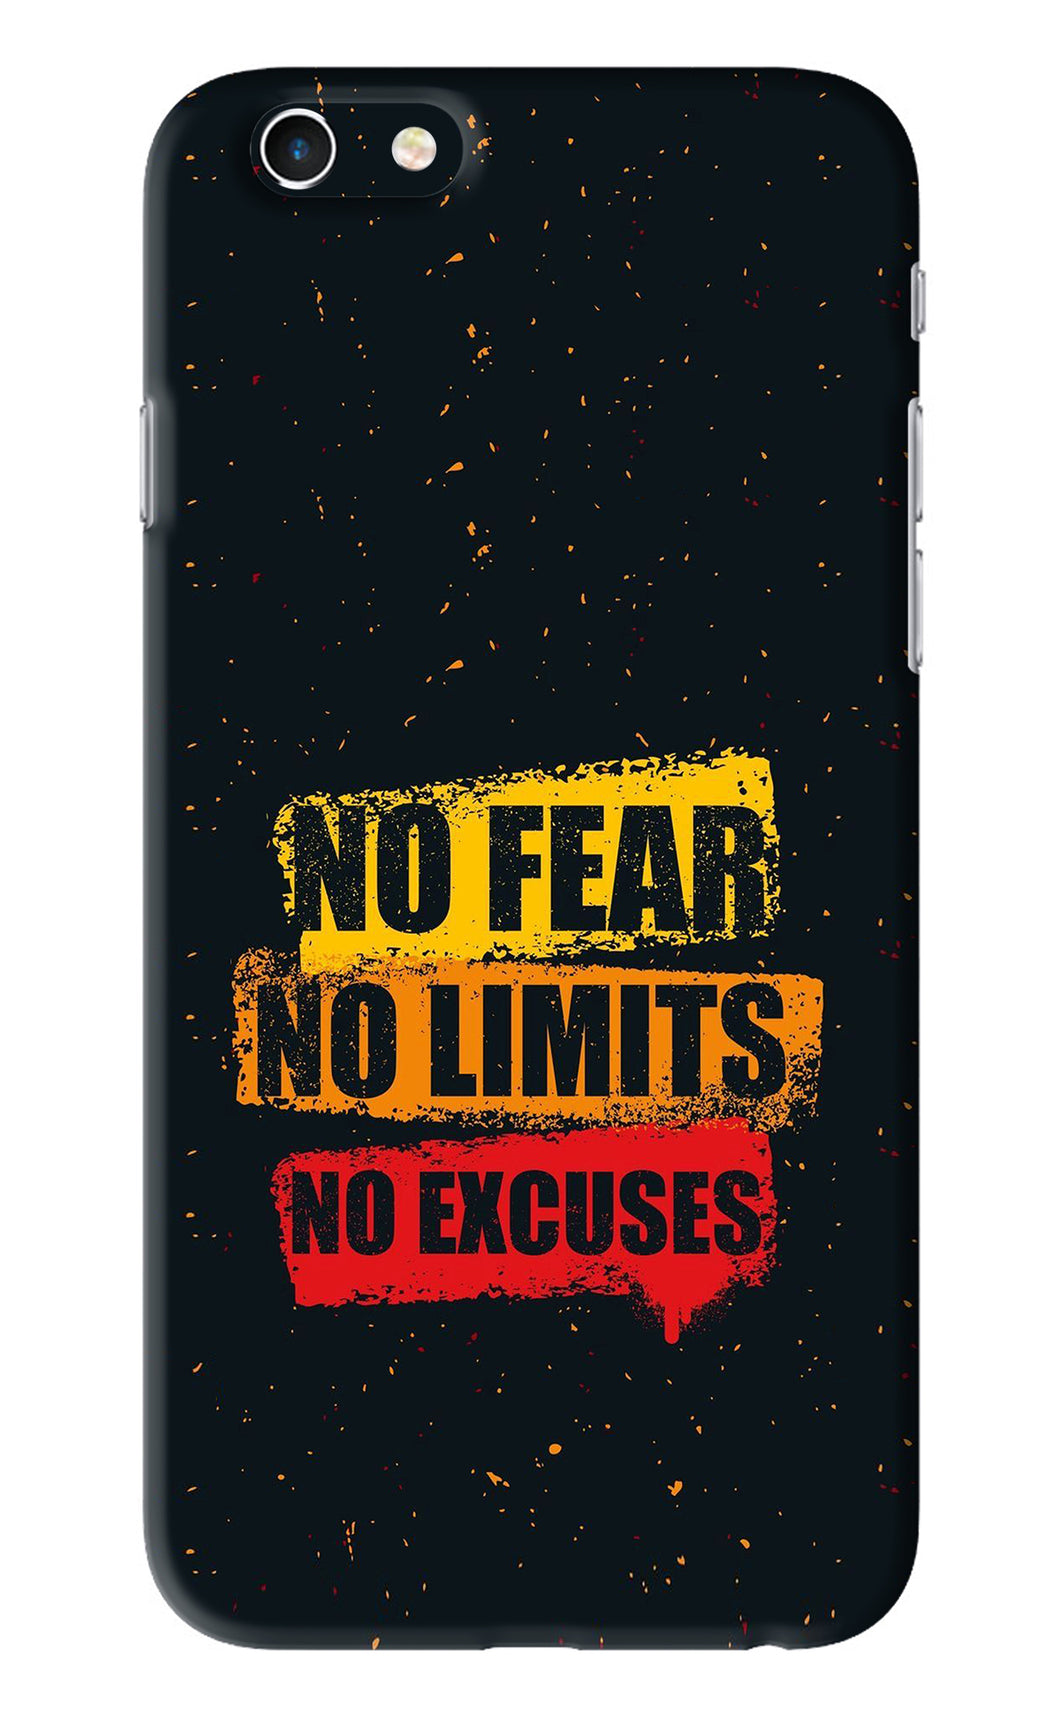 No Fear No Limits No Excuses iPhone 6 Back Skin Wrap